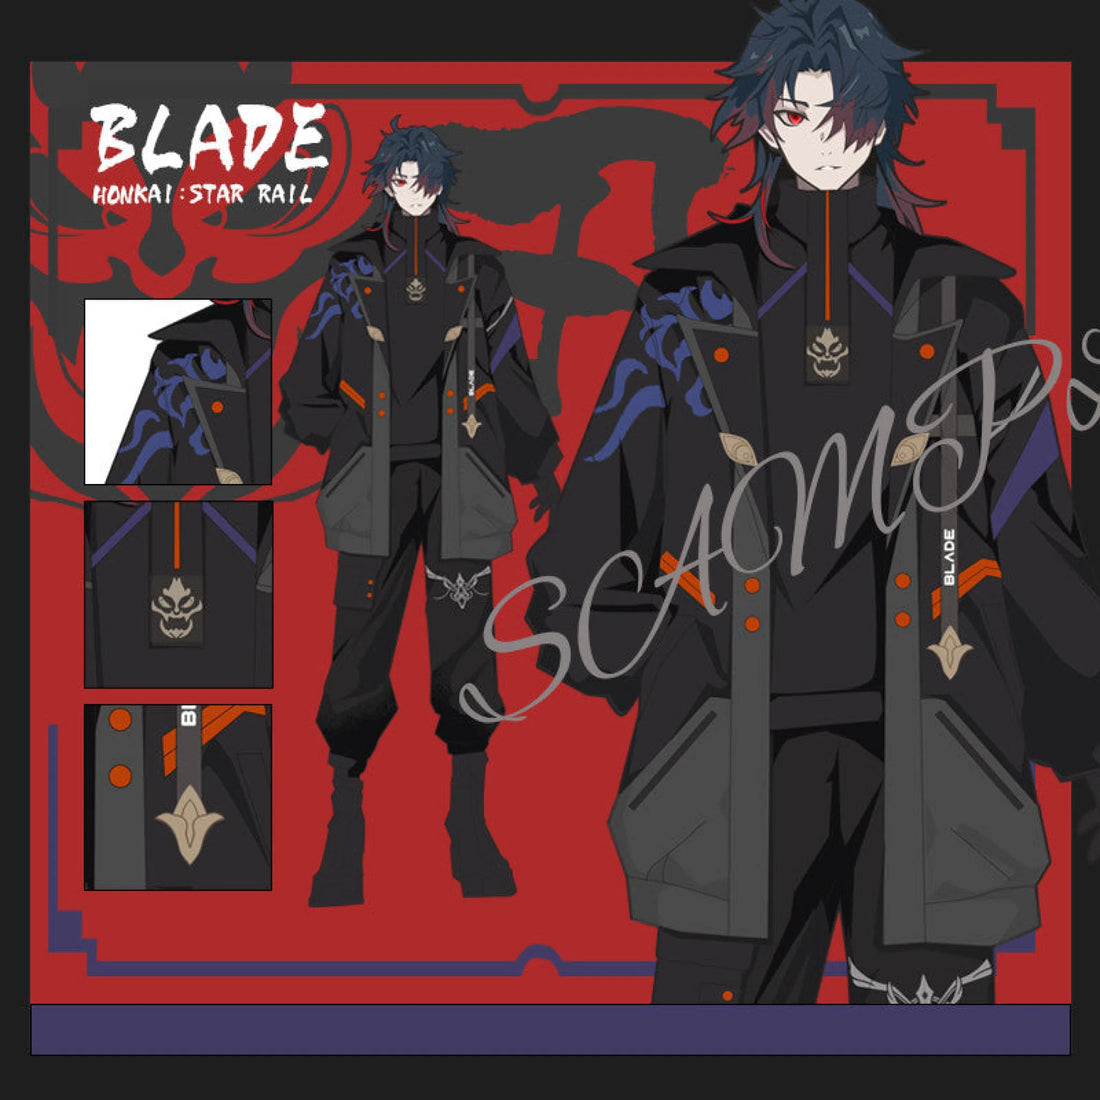 Honkai Starrail Game Character Blade Design Element Cosplay Outfit Jacket Sweater Pants Set 服装